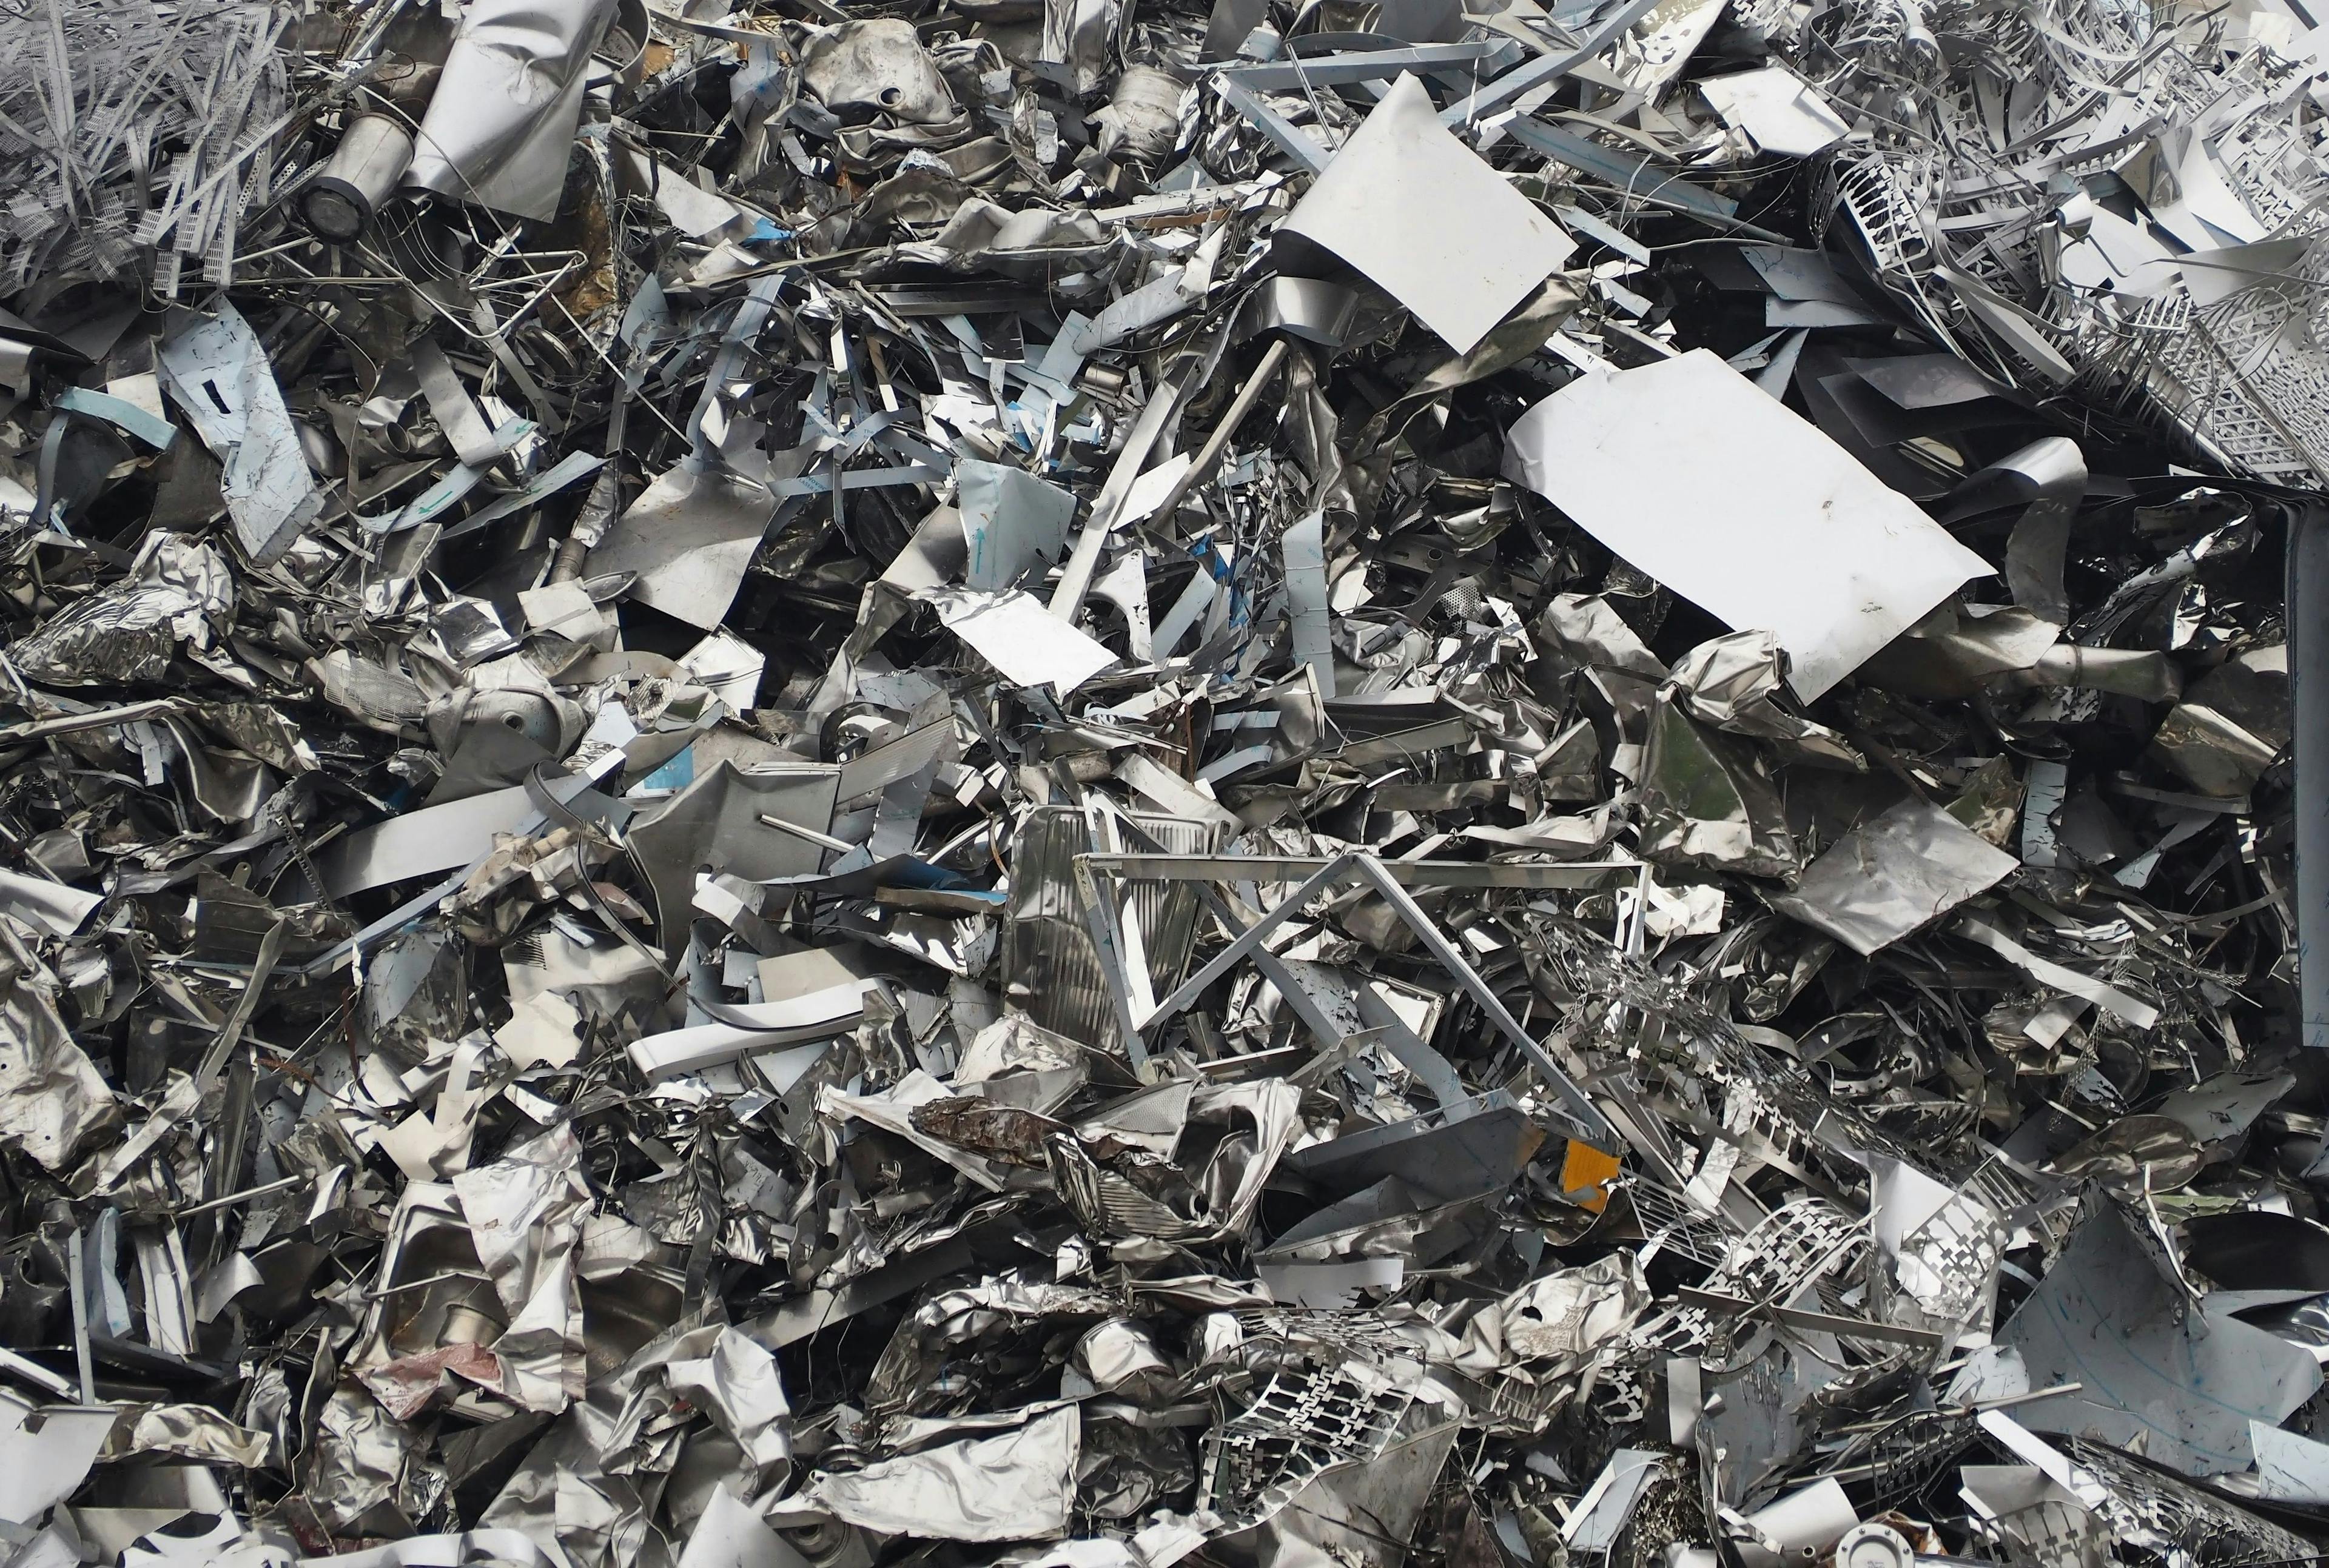 Aluminum and ferrous materials scrap ready for recycling. Full frame, background and texture. | Image Credit: © luca piccini basile - stock.adobe.com